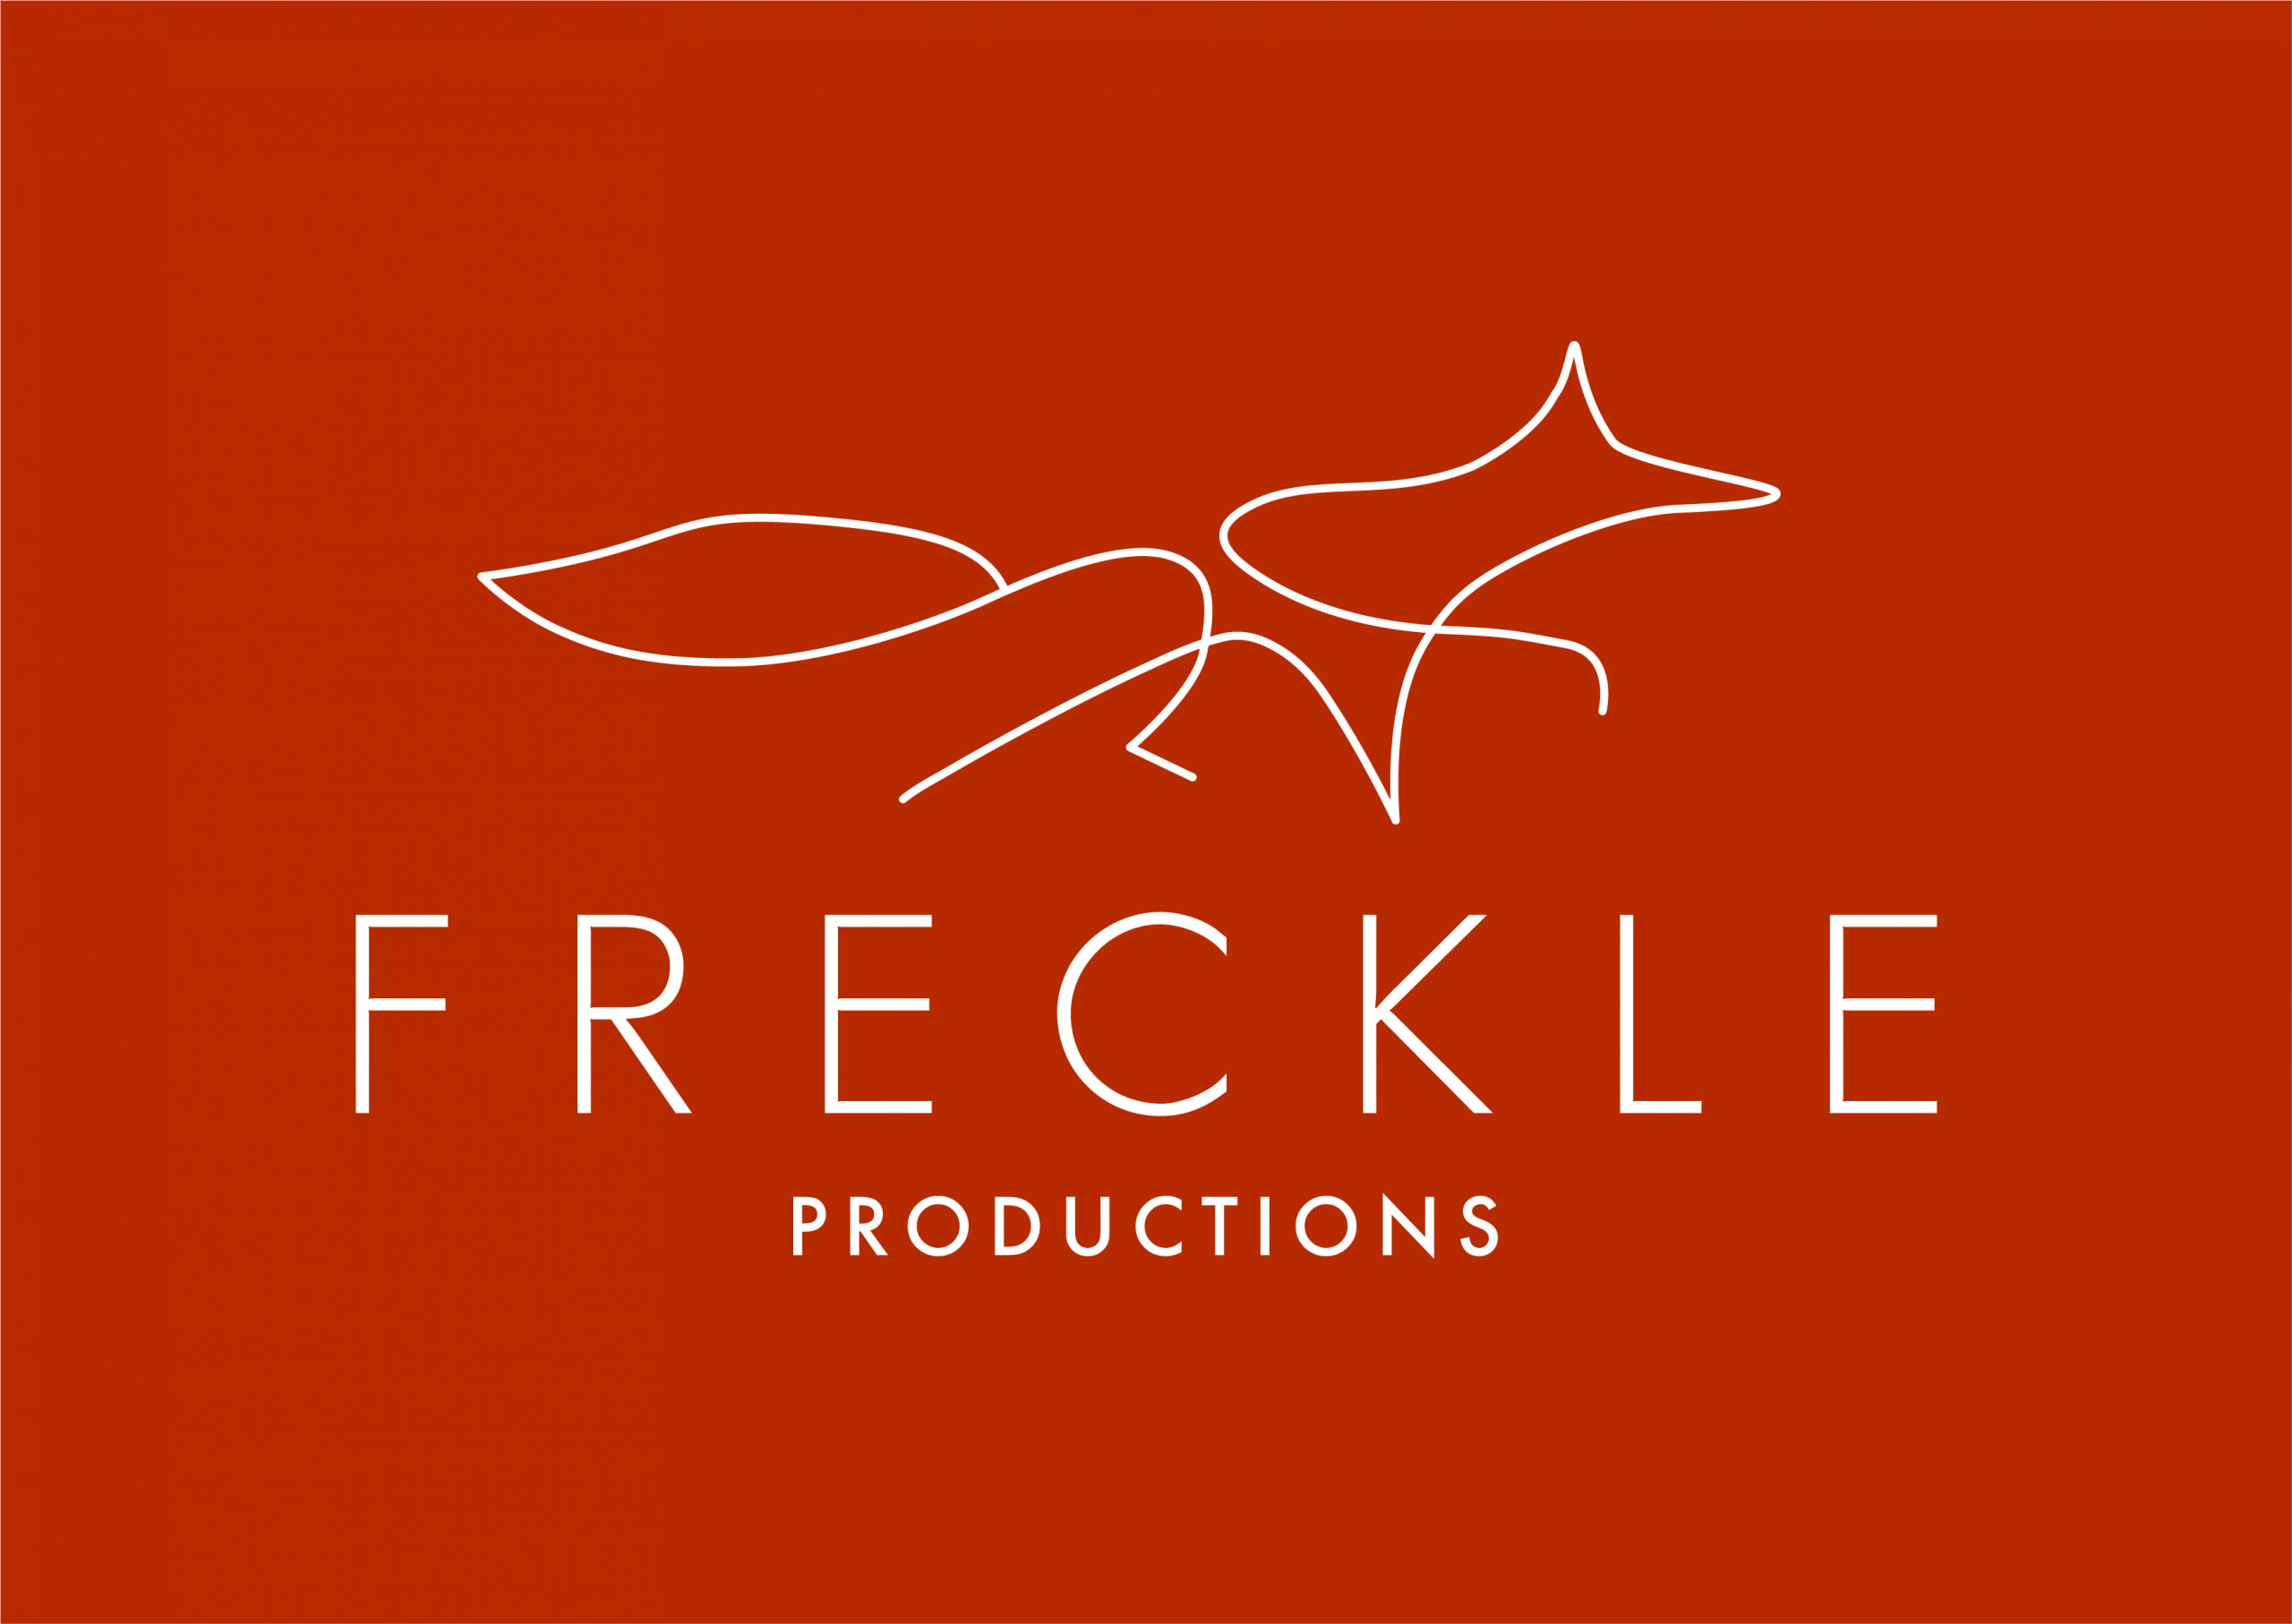 Freckle Productions logo